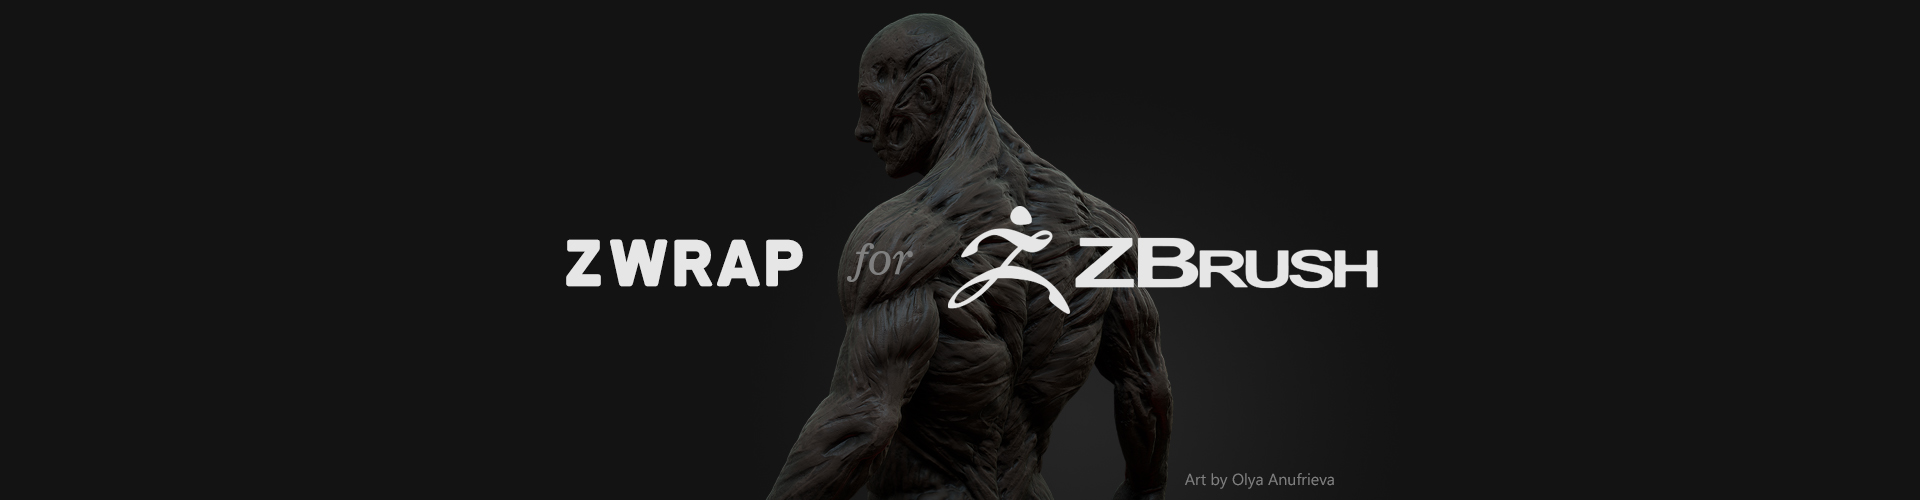 turnoff auto save in zbrush 4r8